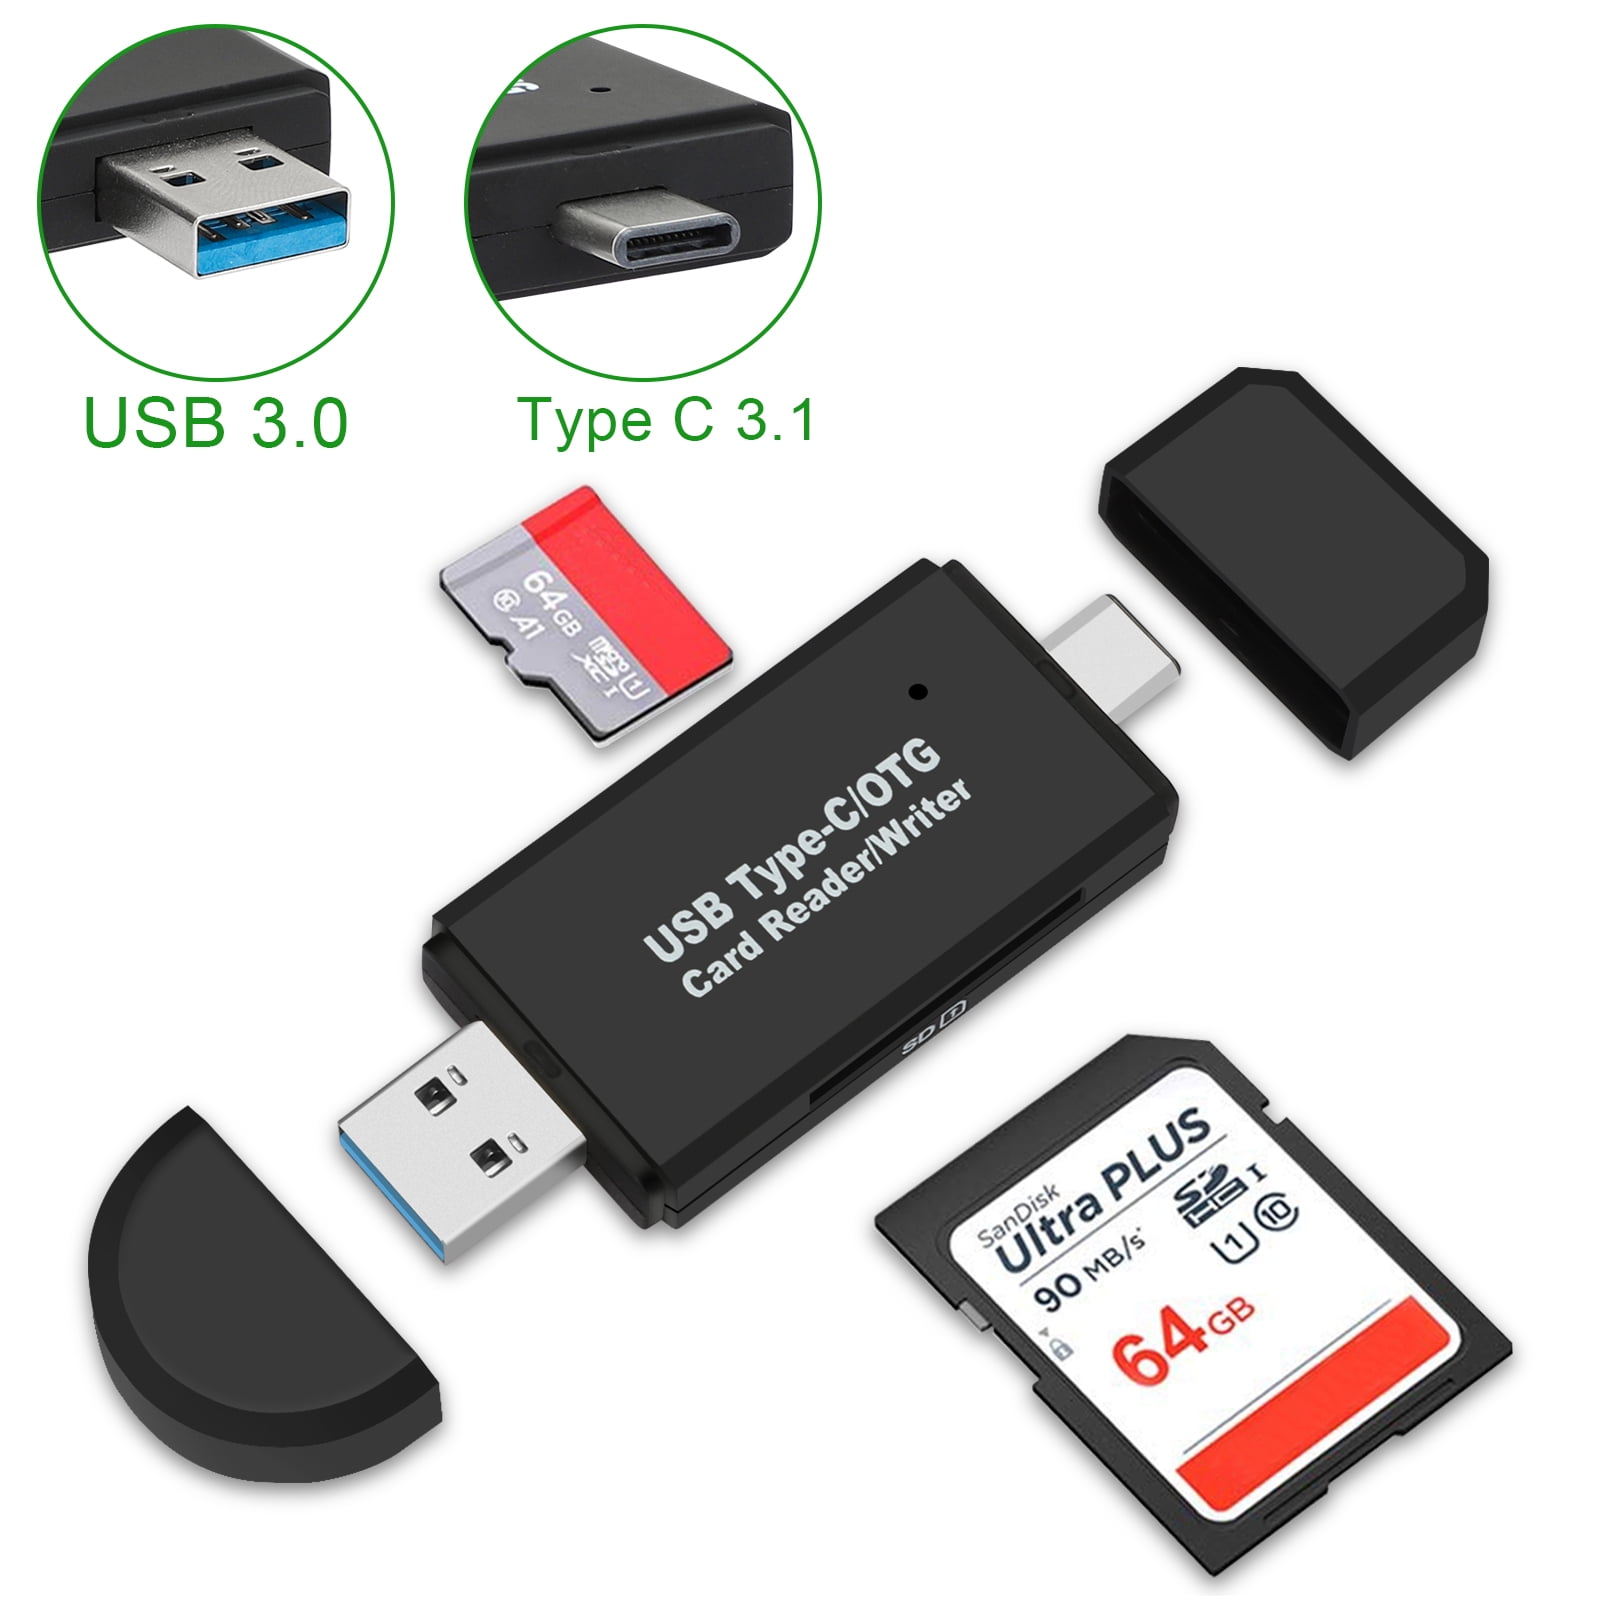 Card Reader, TSV 3.0 Type C OTG Adapter Memory Card Reader for SD /Micro SD/TF/SDXC/SDHC/MMC/RS-MMC/Microsdhc/Microsdxc, Camera Flash Card Reader Windows, Linux, Mac OS, Android - Walmart.com